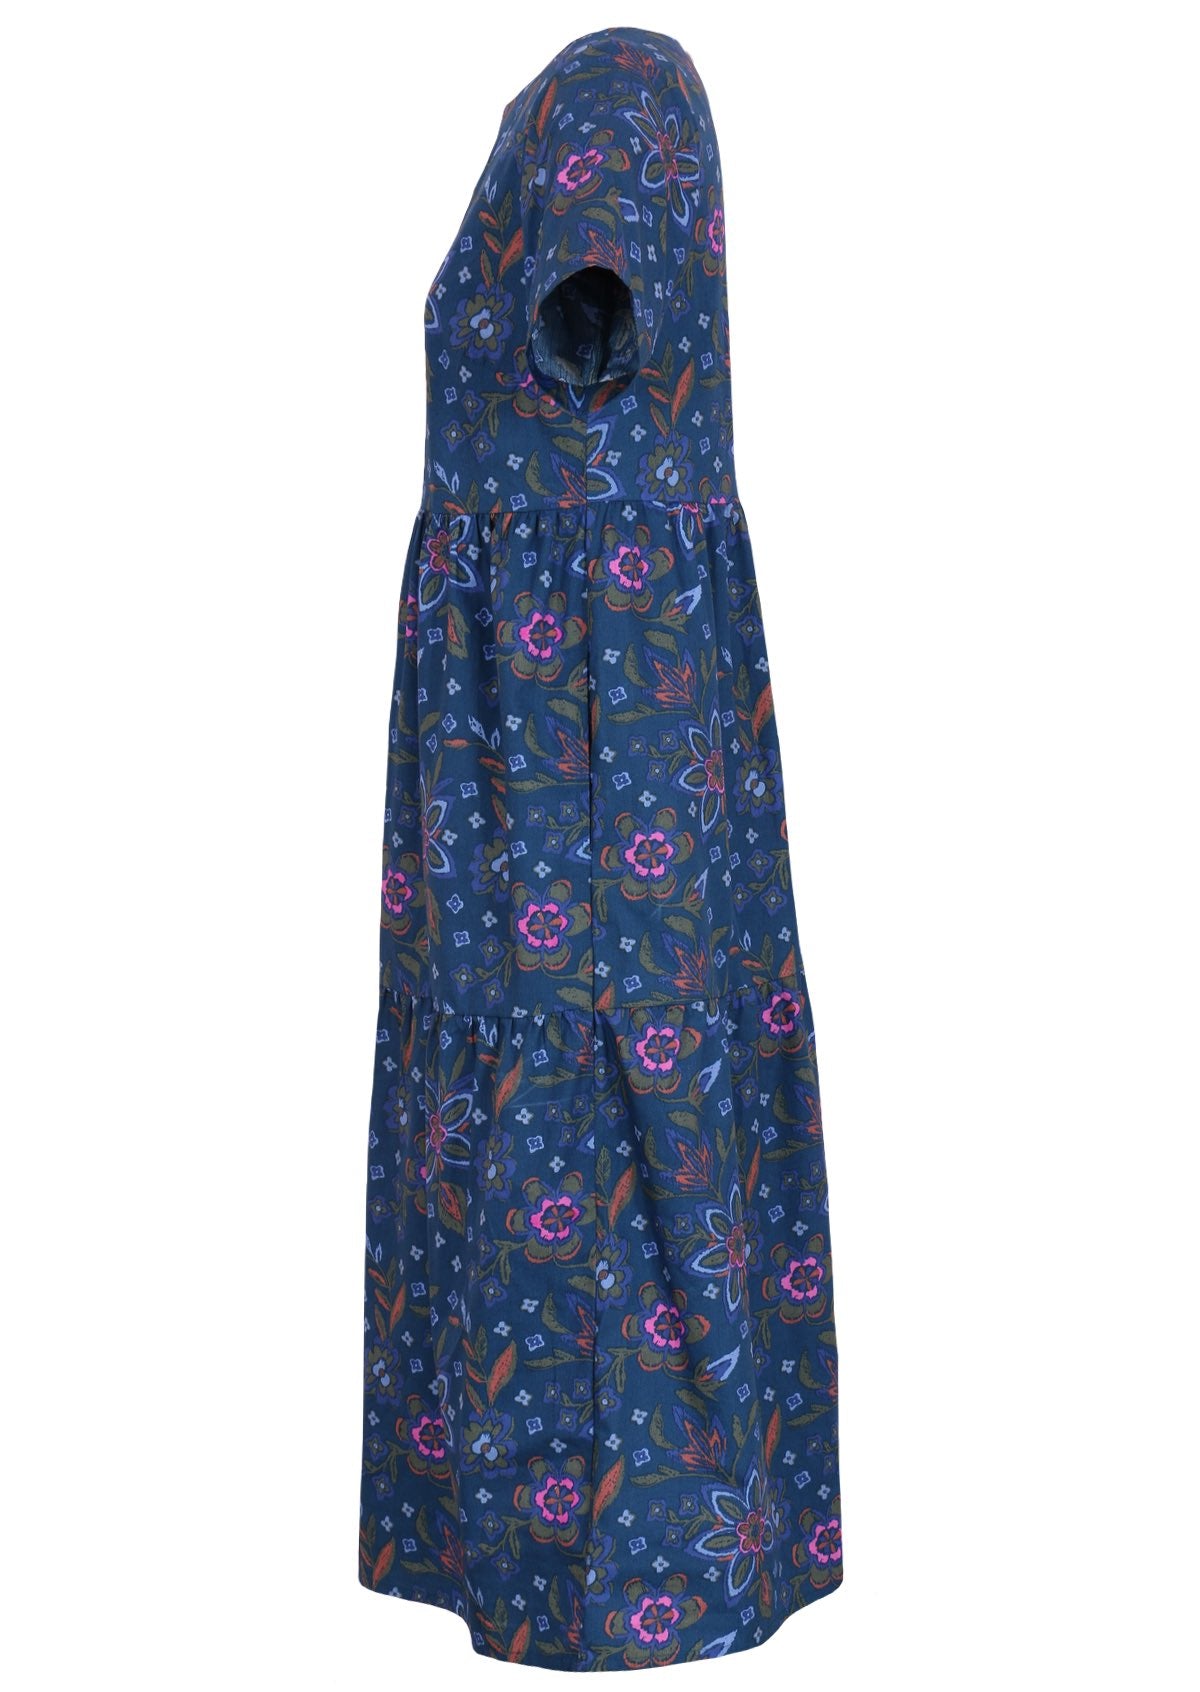 Blue floral dress features tiers and t-shirt sleeves. 